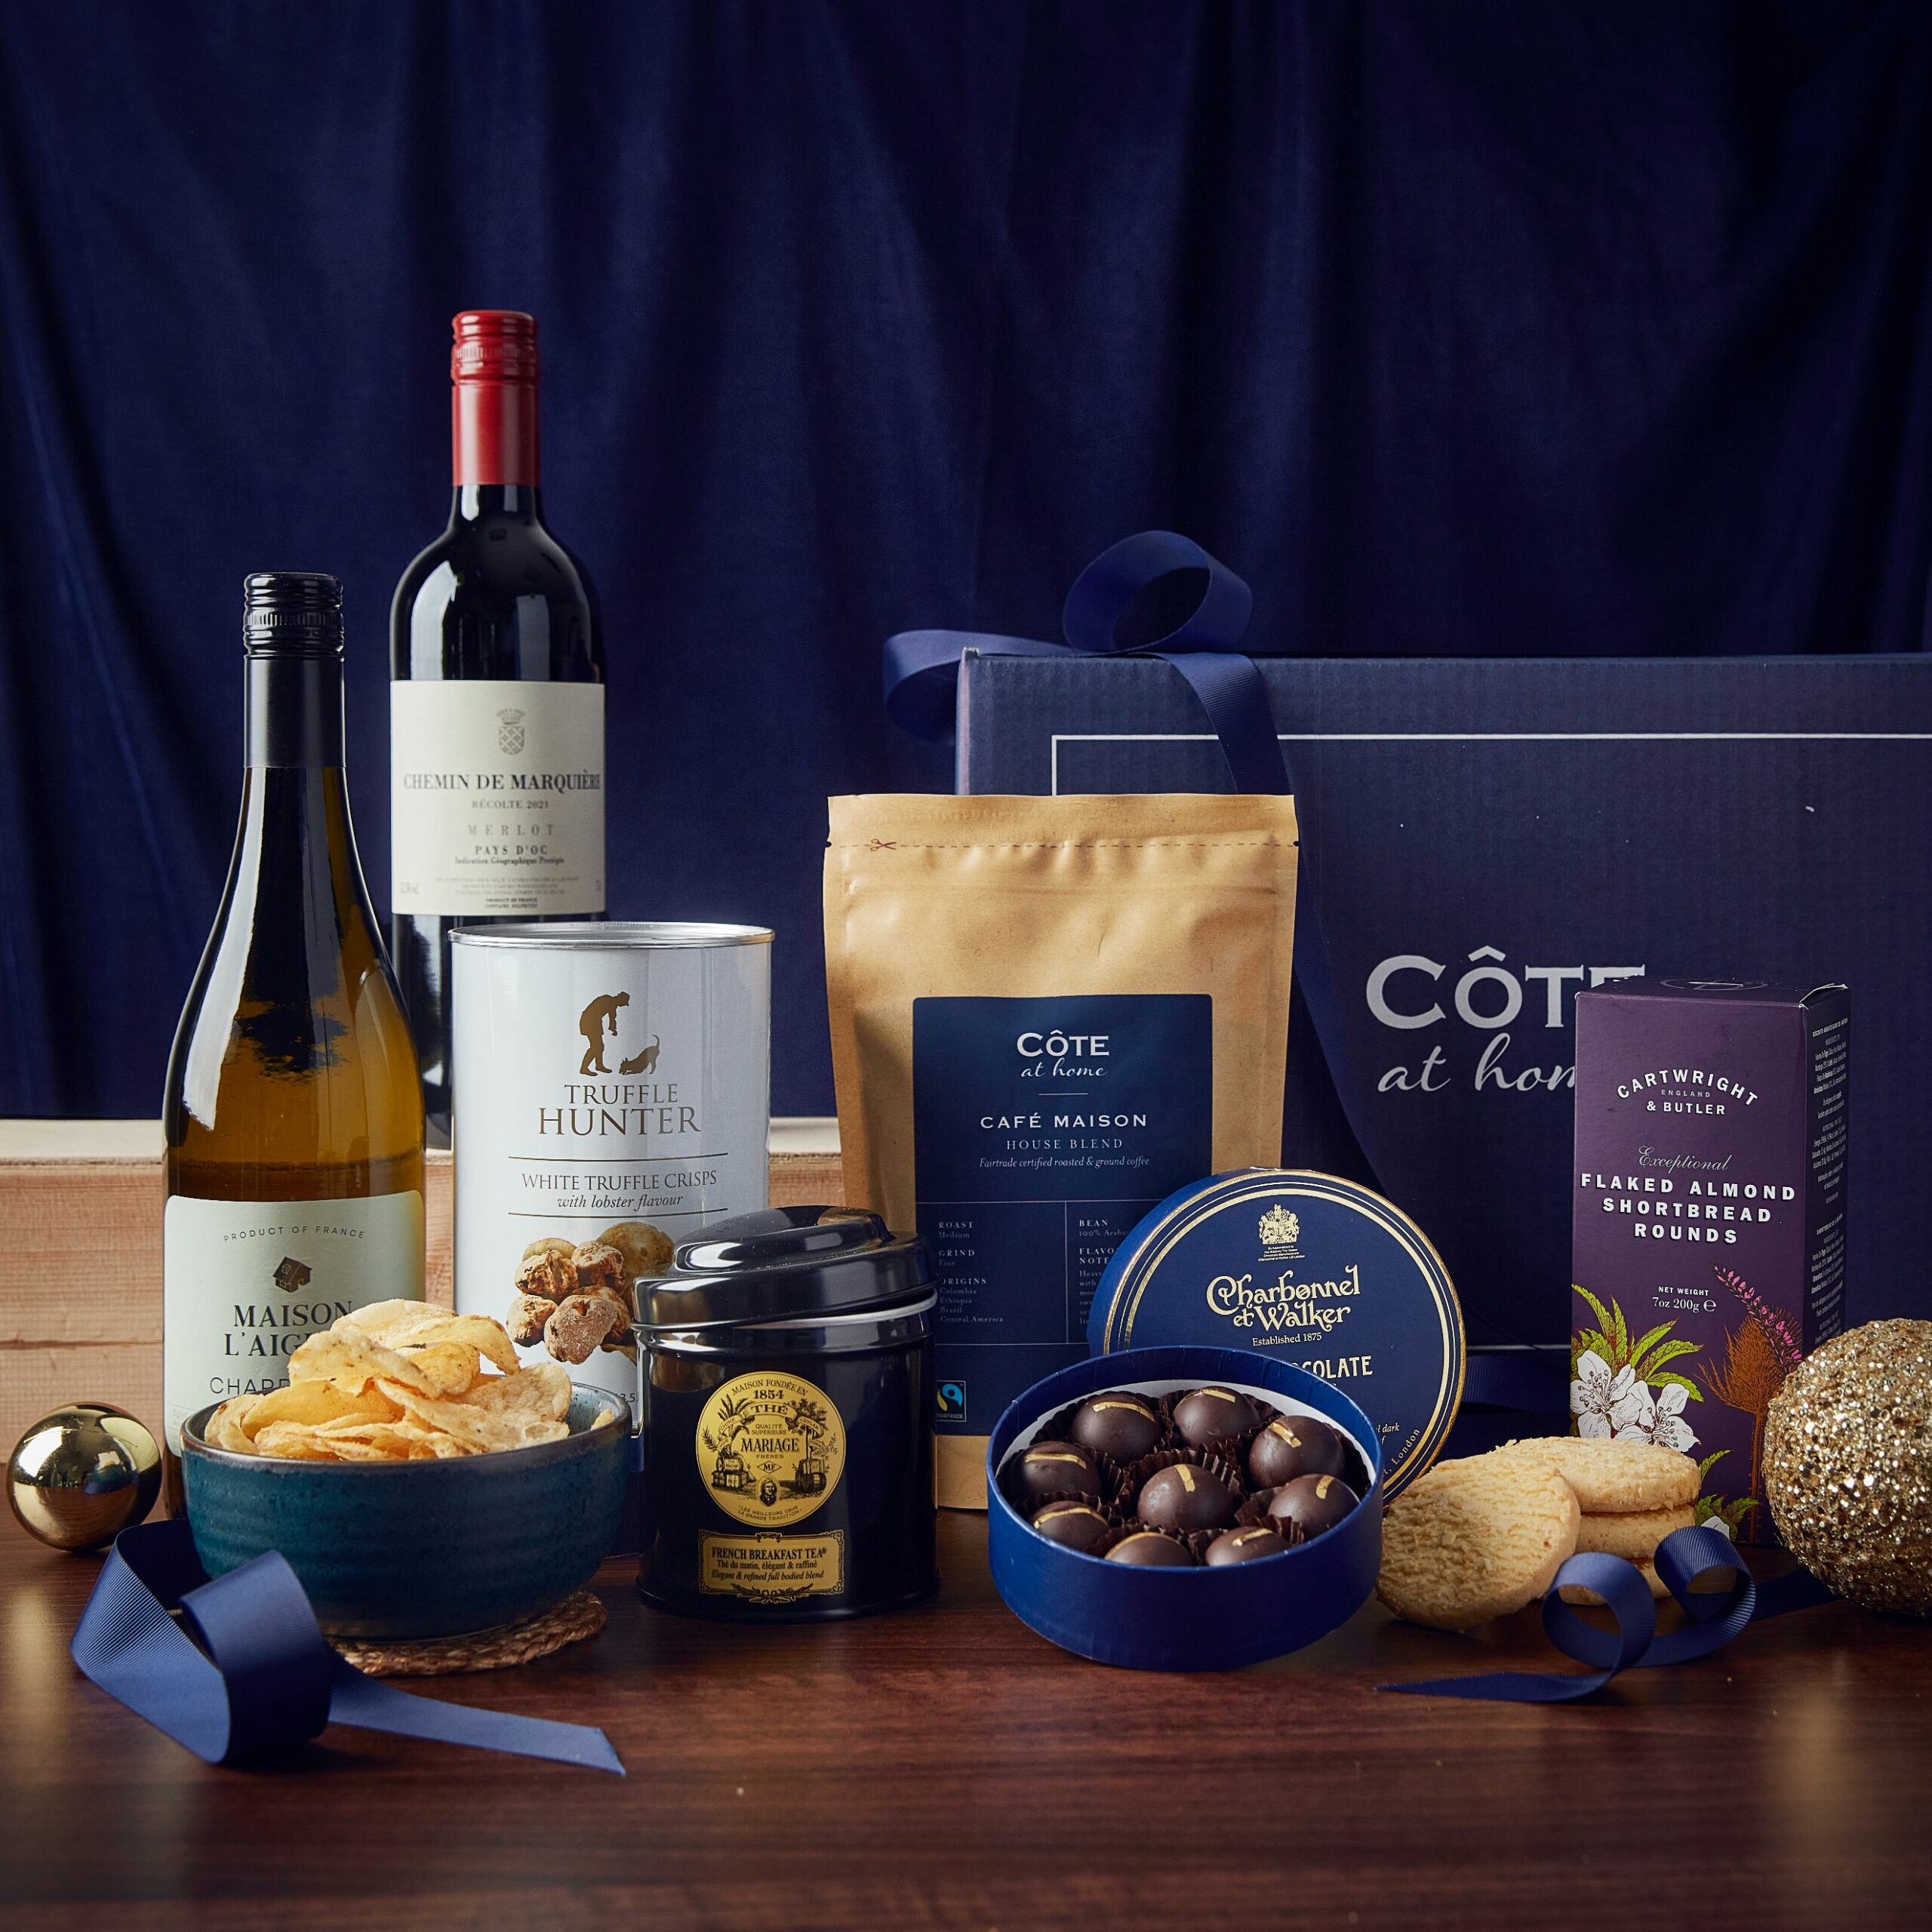 The Cote Festive Gift Box with Wines